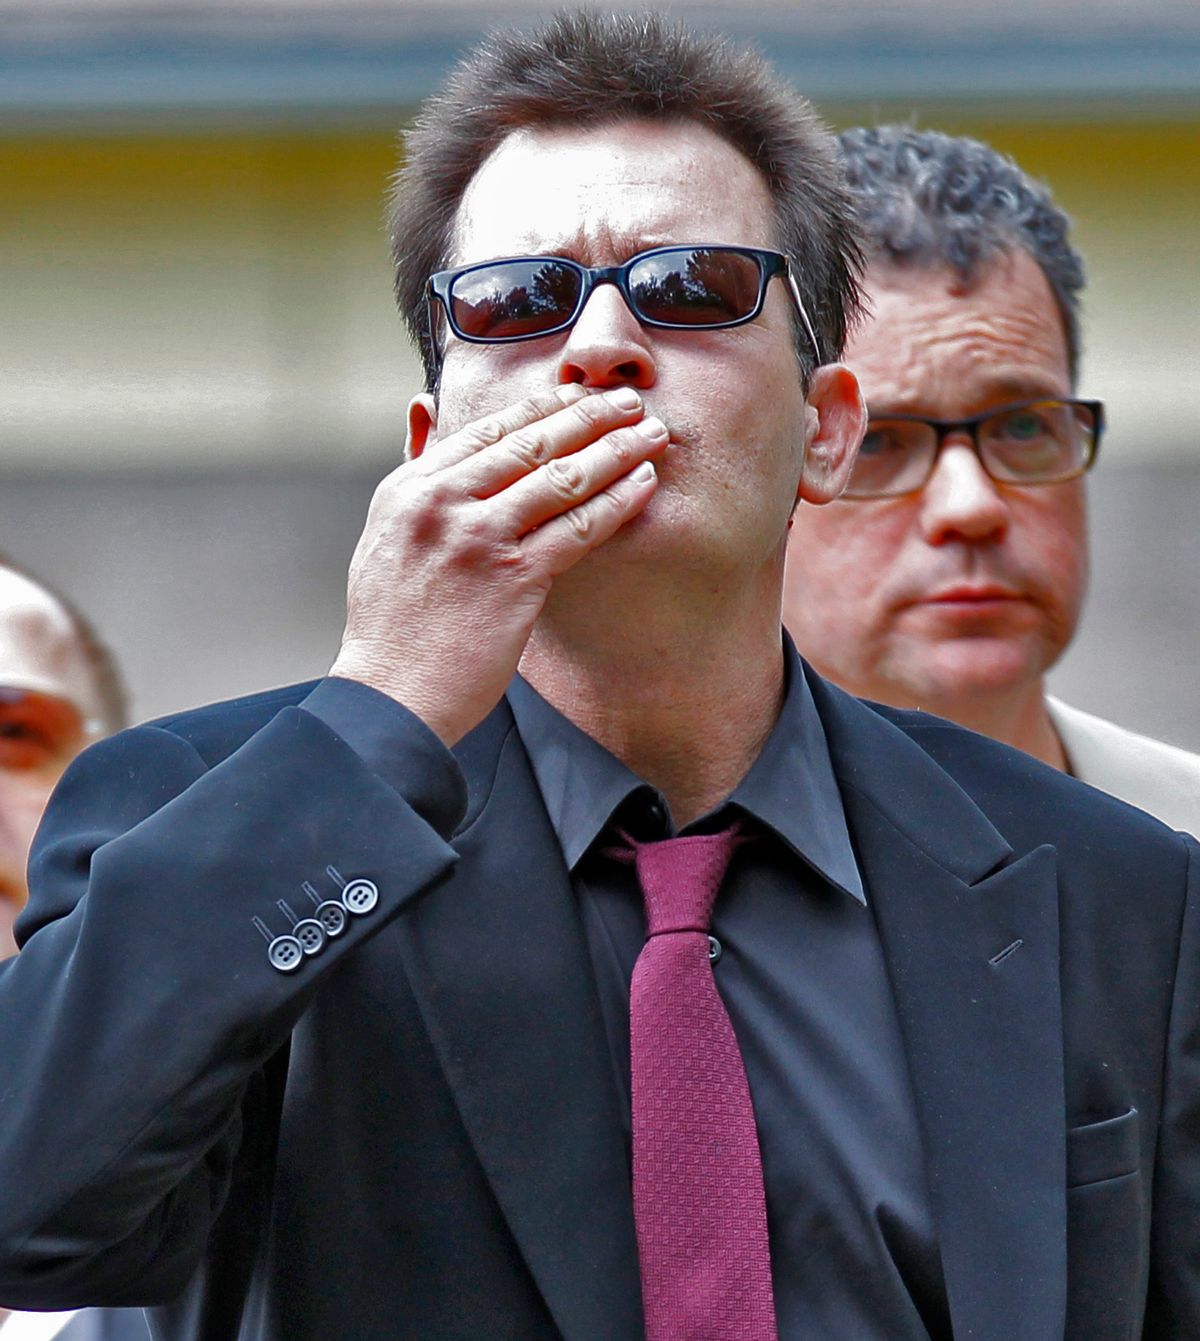 Charlie Sheen gestures with a victory sign as he arrives at the Pitkin County Courthouse in Aspen, Colo., on Monday, Aug 2, 2010, for a hearing in his domestic abuse case. (AP Photo/Ed Andrieski (Ed Andrieski)